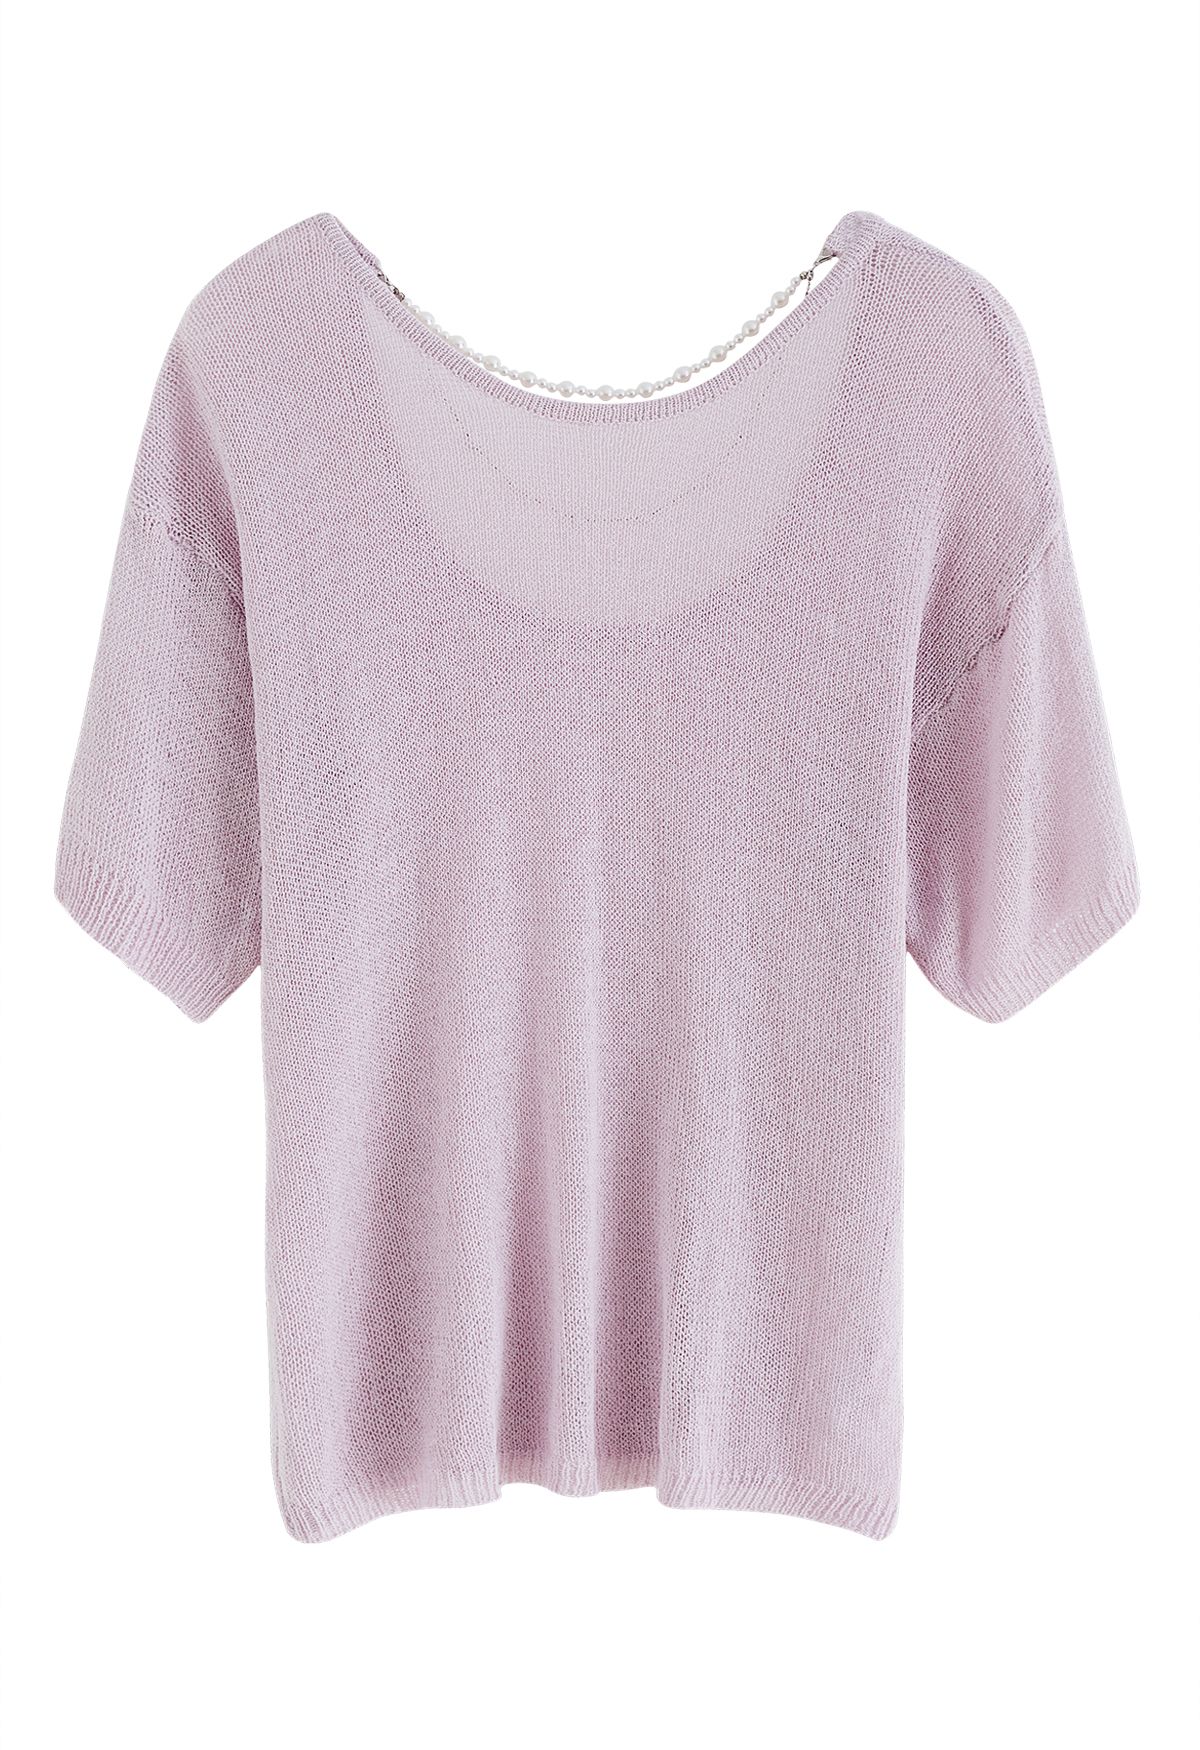 Pearl Necklace Short Sleeve Knit Top in Lilac